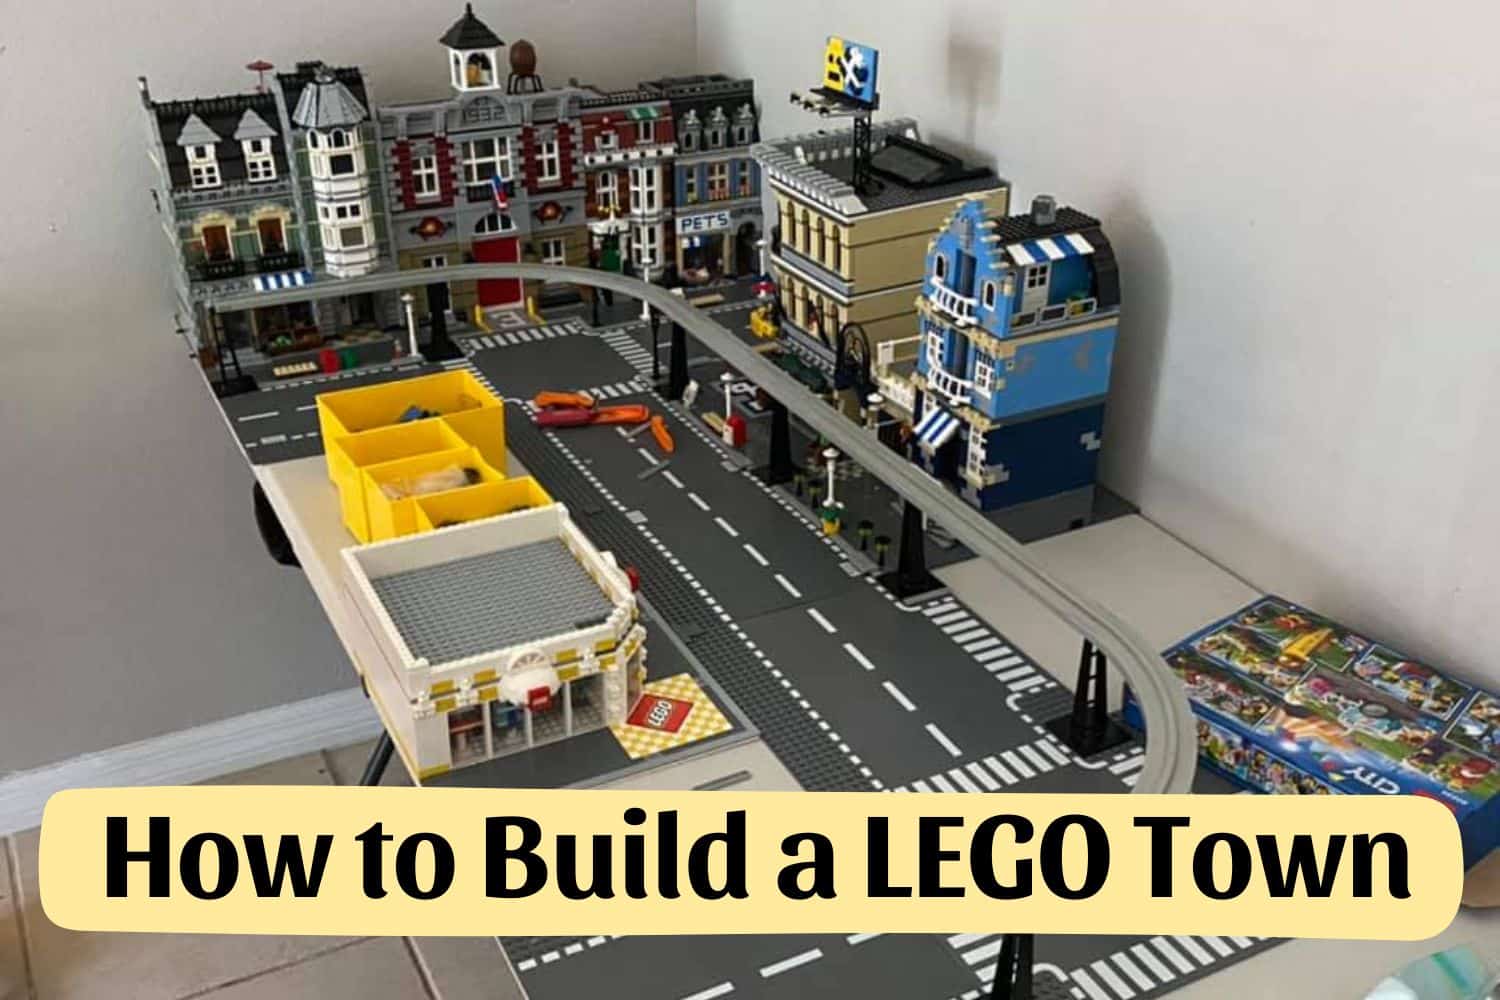 How to Build a LEGO Town